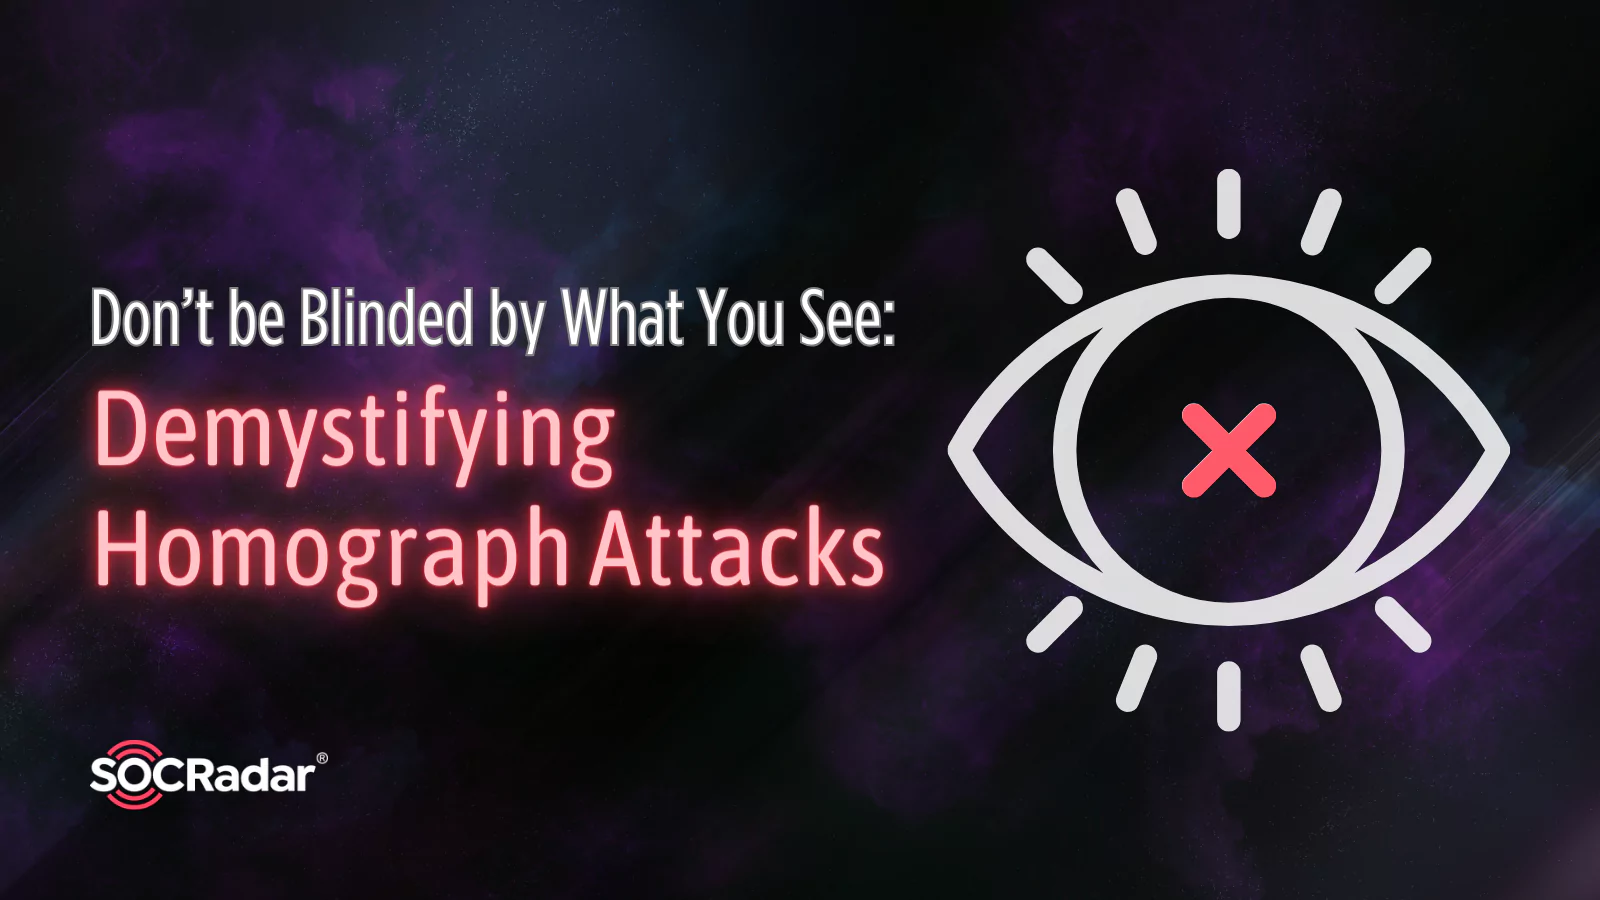 SOCRadar® Cyber Intelligence Inc. | Don't be Blinded by What You See: Demystifying Homograph Attacks